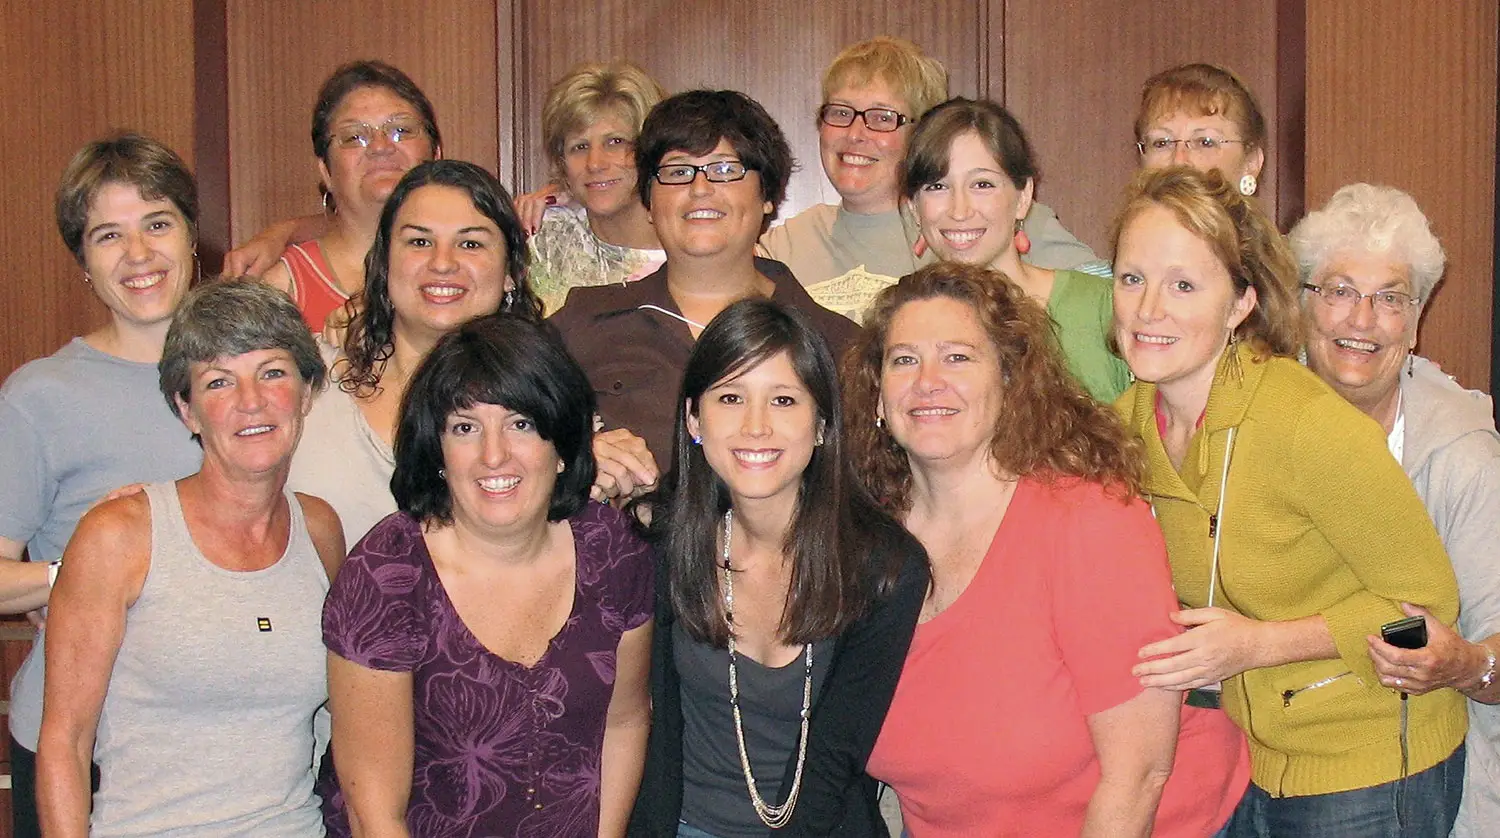 A group photo of feminine presenting people across many ages.